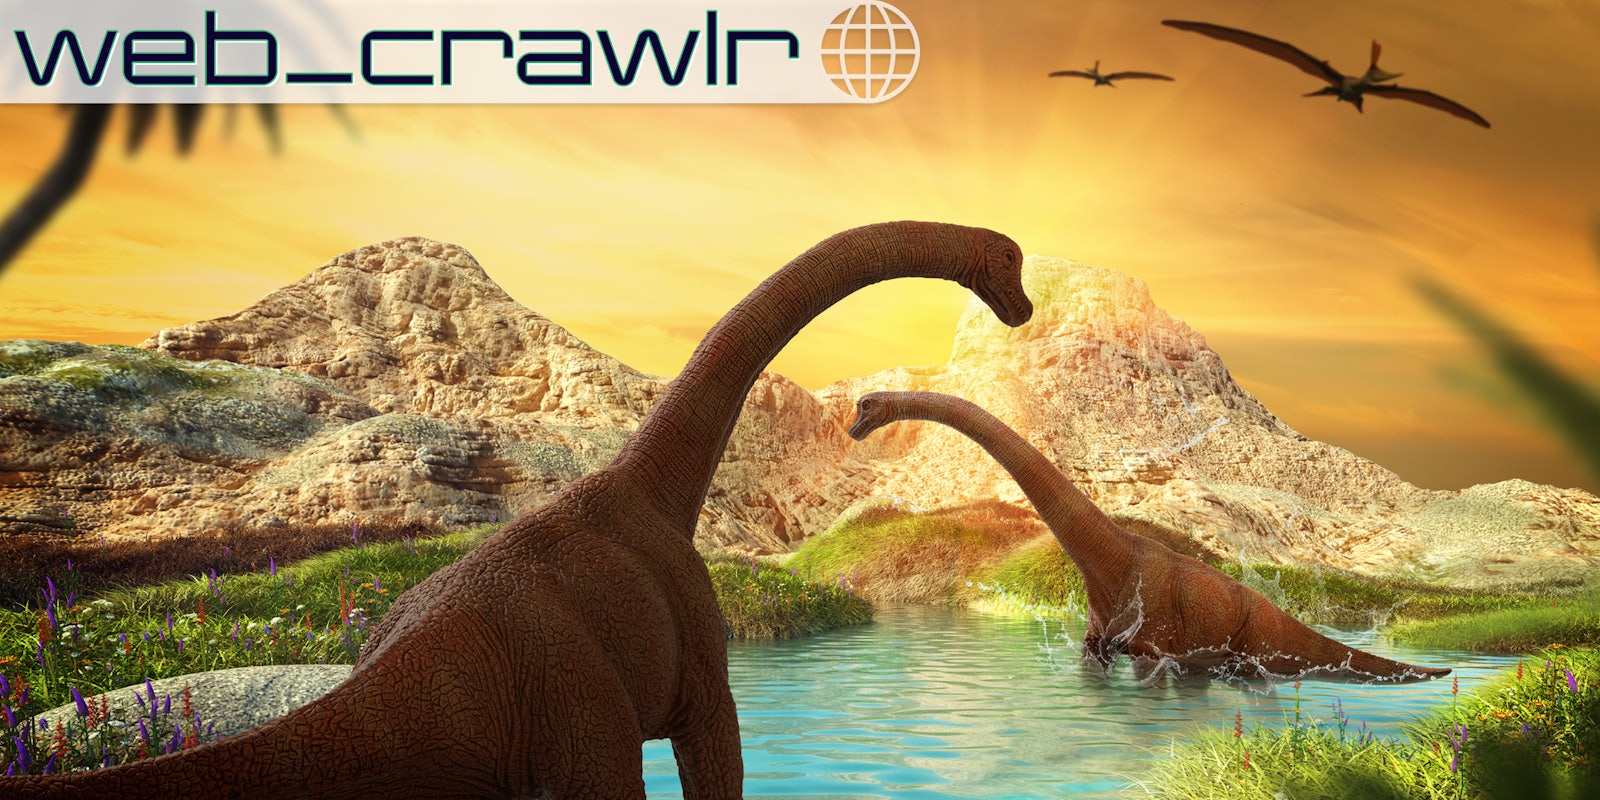 An illustration of dinosaurs. The Daily Dot newsletter web_crawlr logo is in the top left corner.